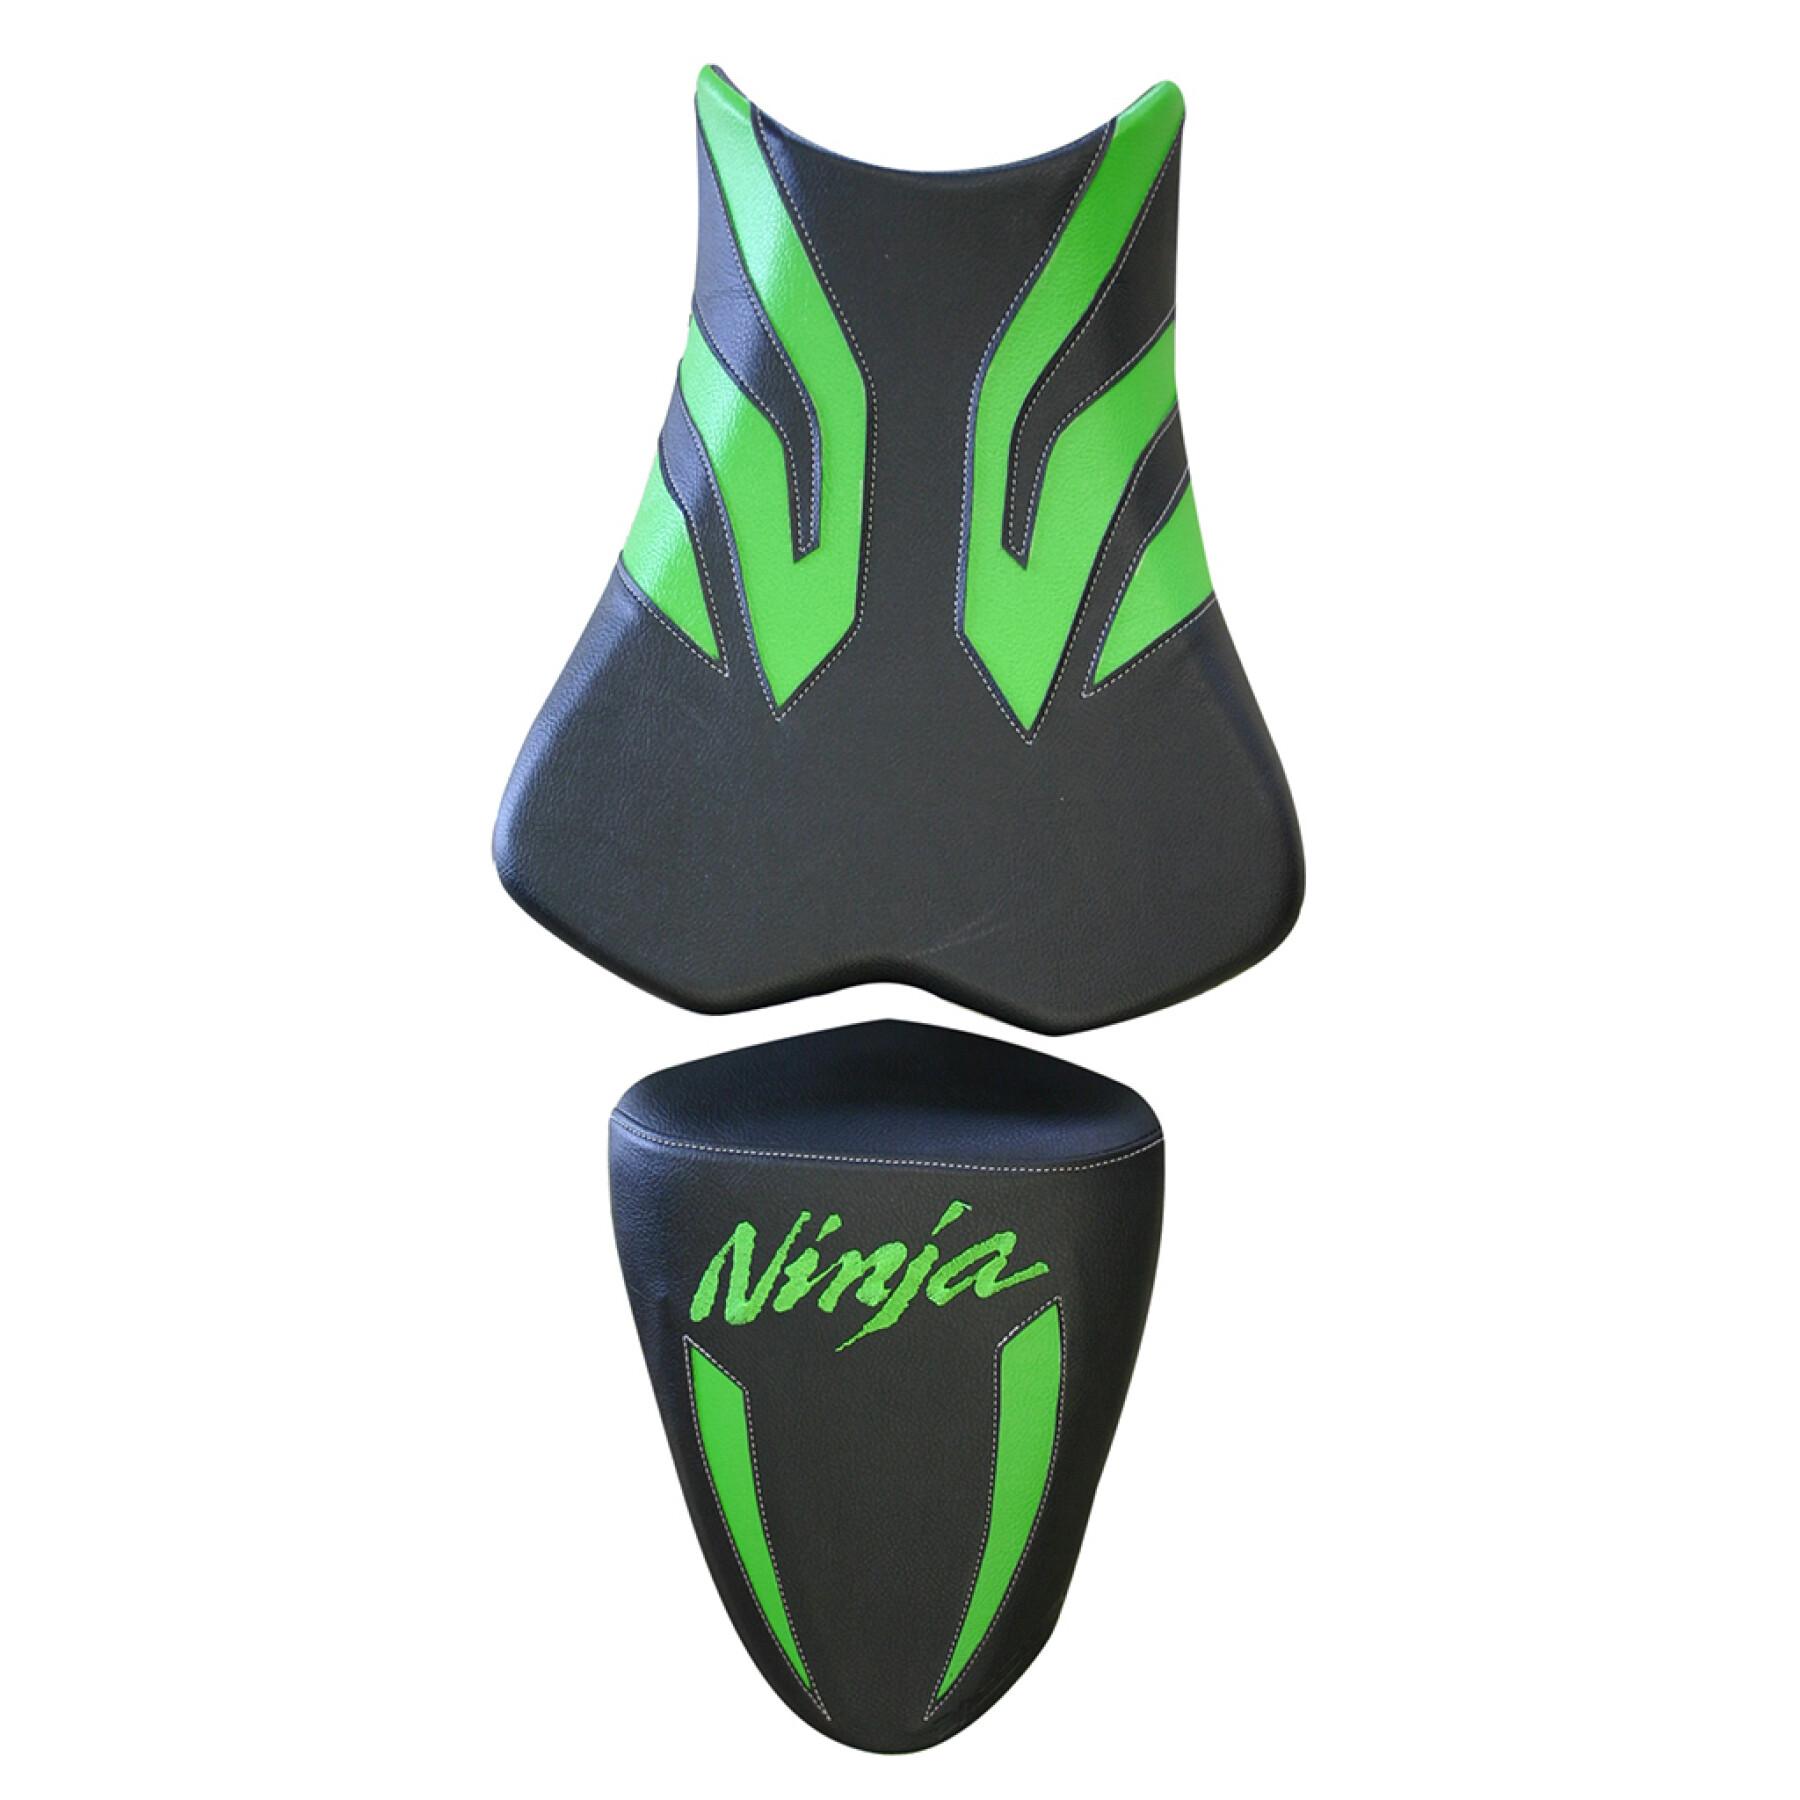 Scooter seat cover Bagster zx 6 r